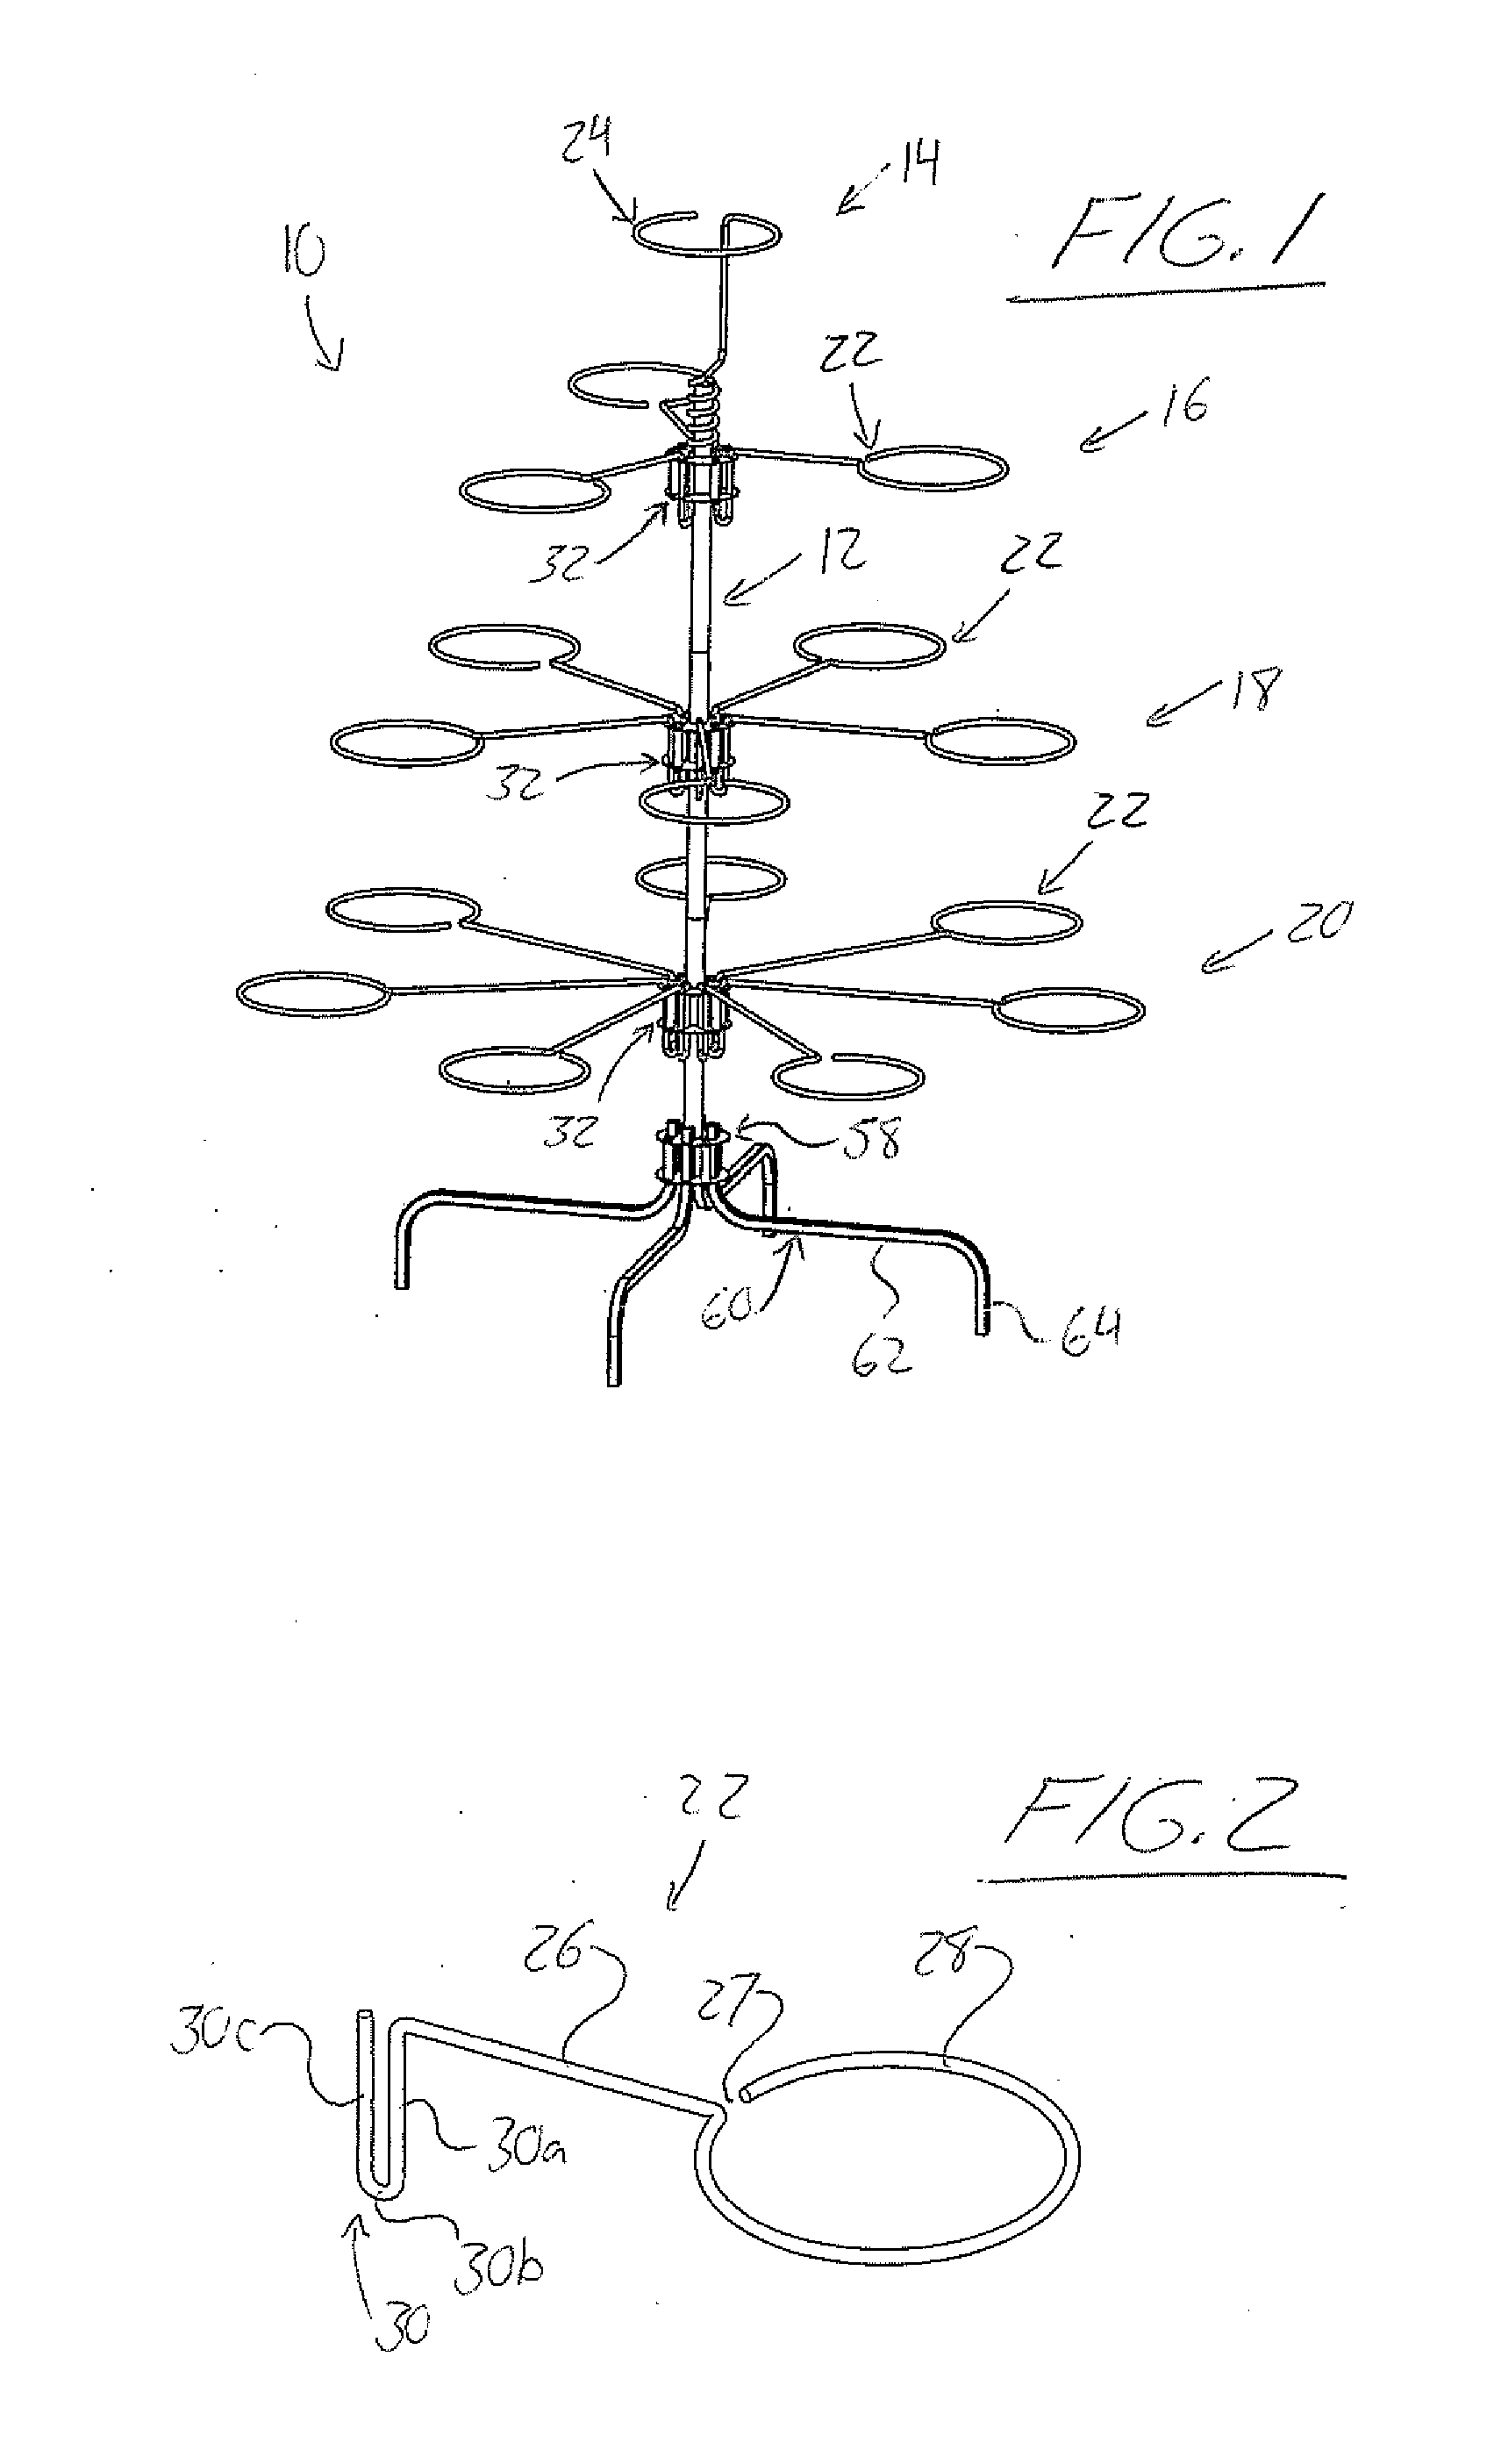 Tree-Style Potted Plant Holder and Hubs, Supports, Adapters and Watering System for Same